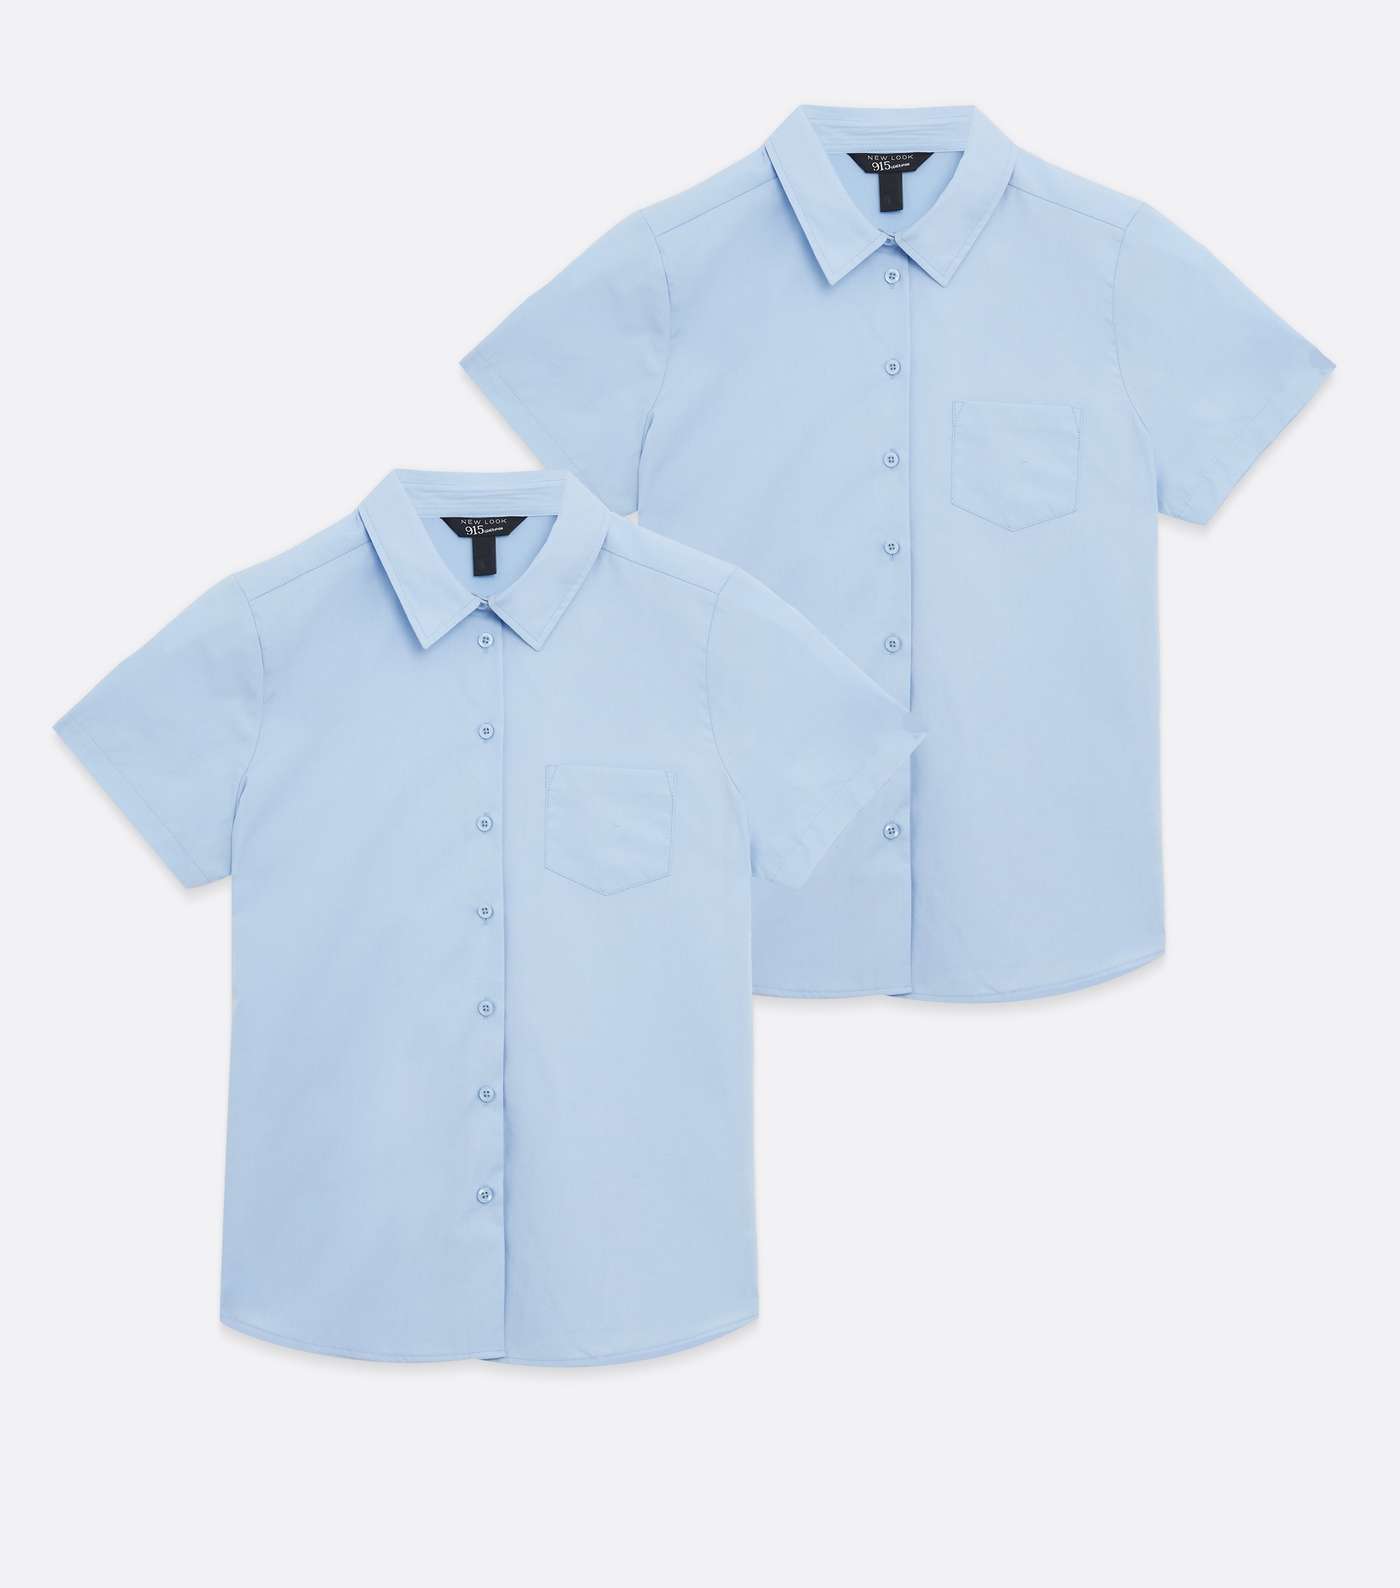 Girls 2 Pack Pale Blue Collared Short Sleeve Shirts Image 5